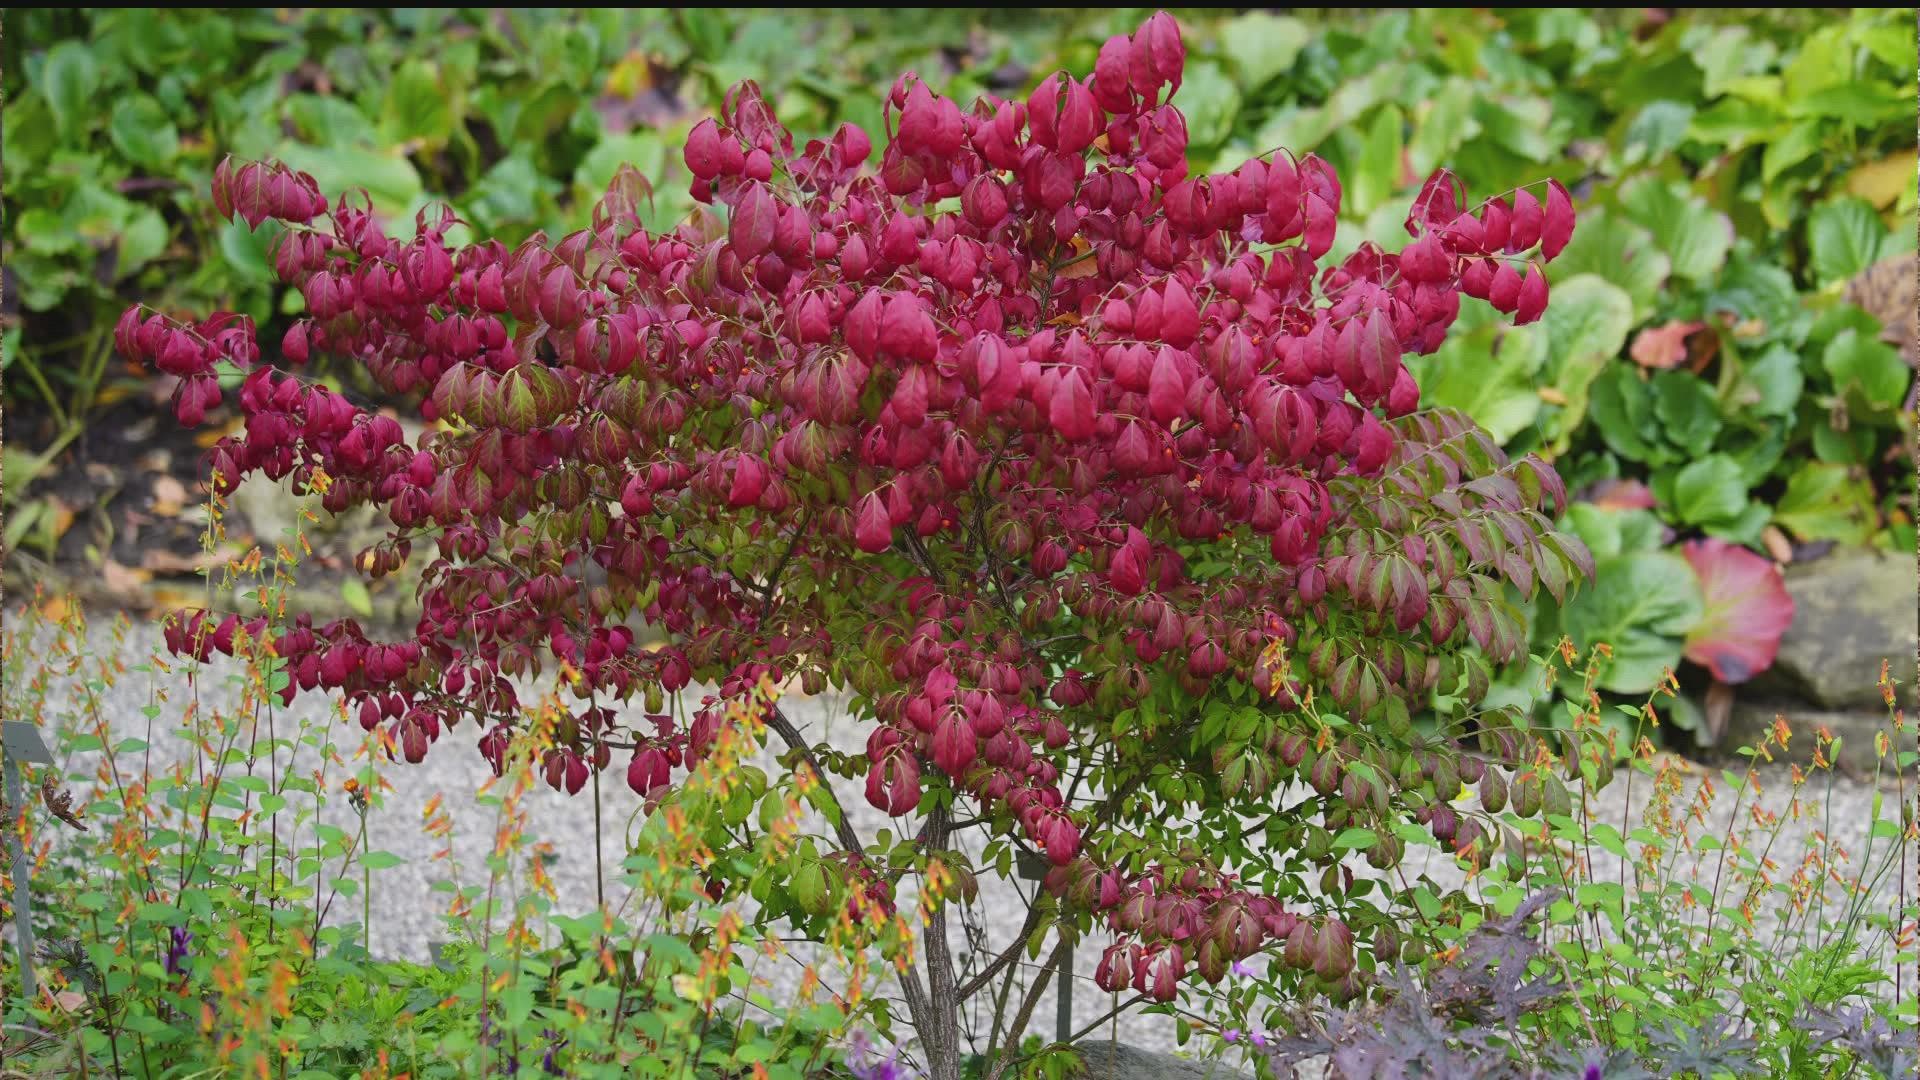 Those with burning bush in their landscape are encouraged to replace it with a native shrub, although it is not illegal to have burning bush in your yard.